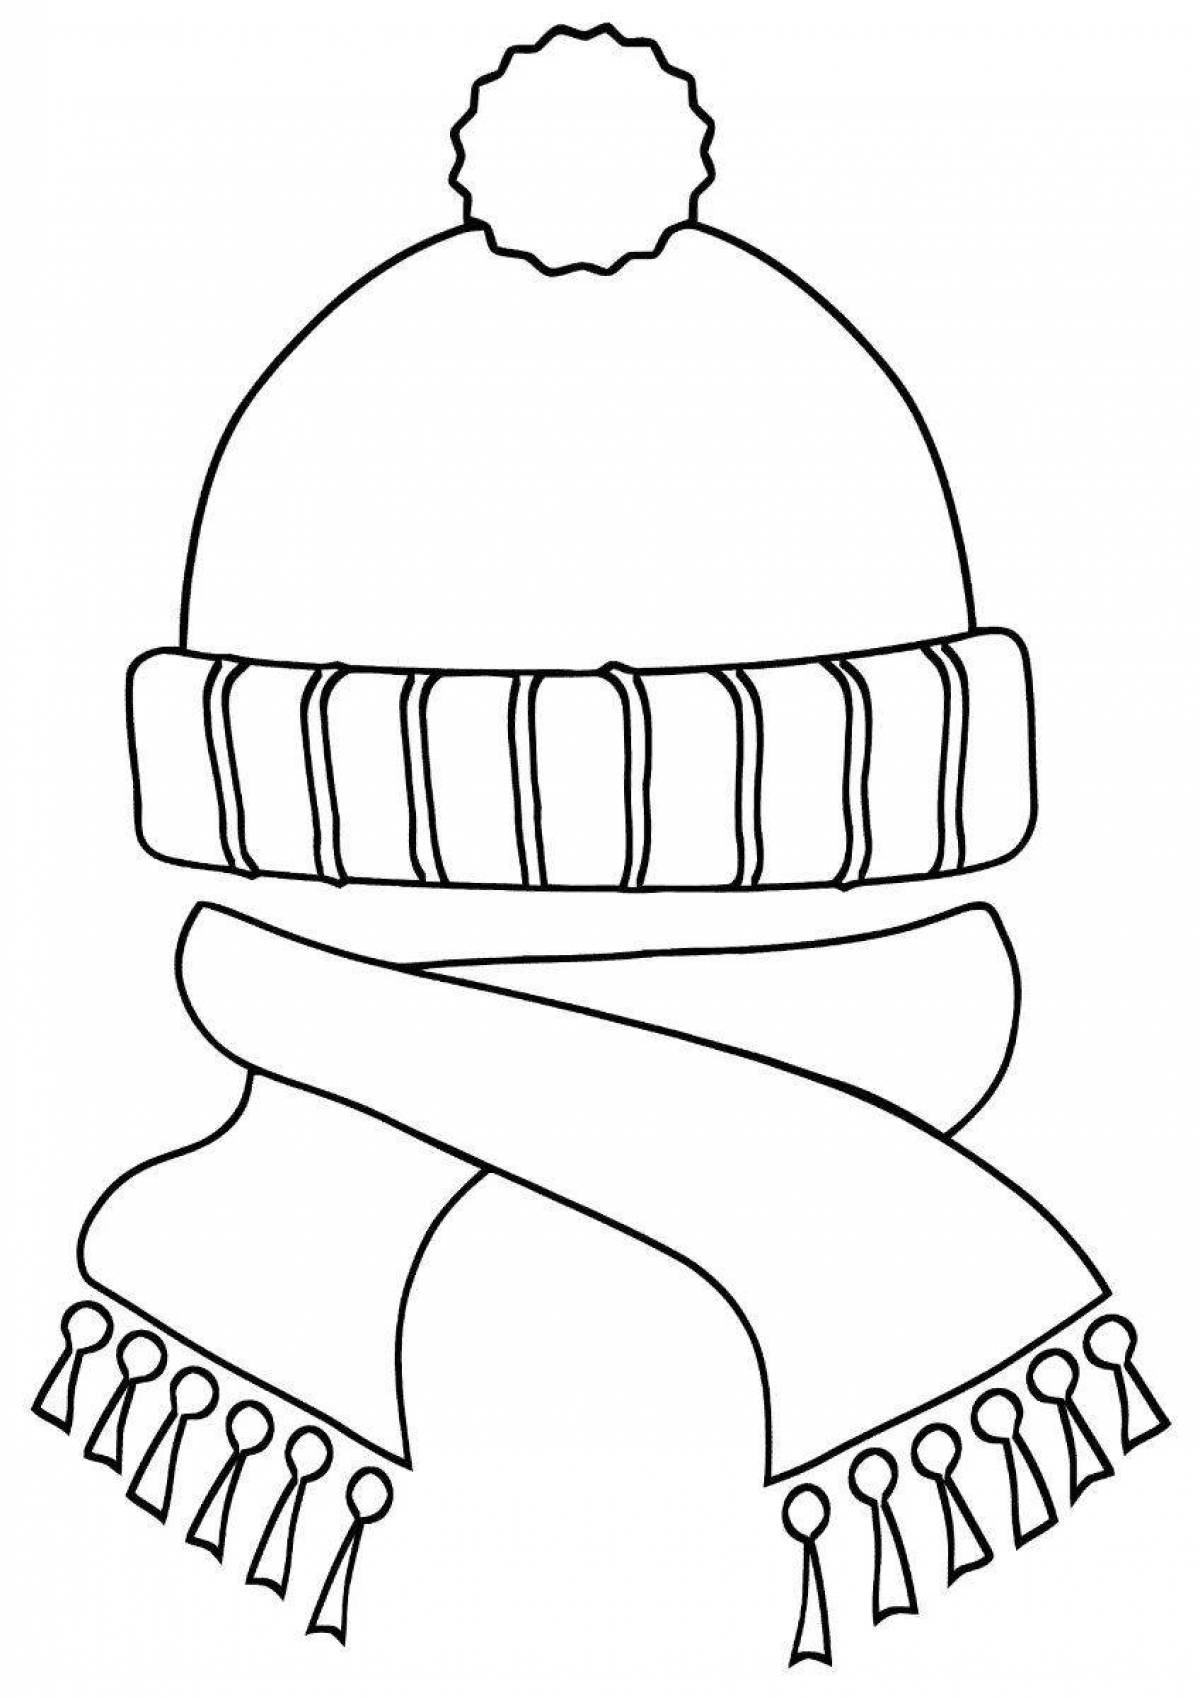 Sweet winter clothes coloring pages for kids